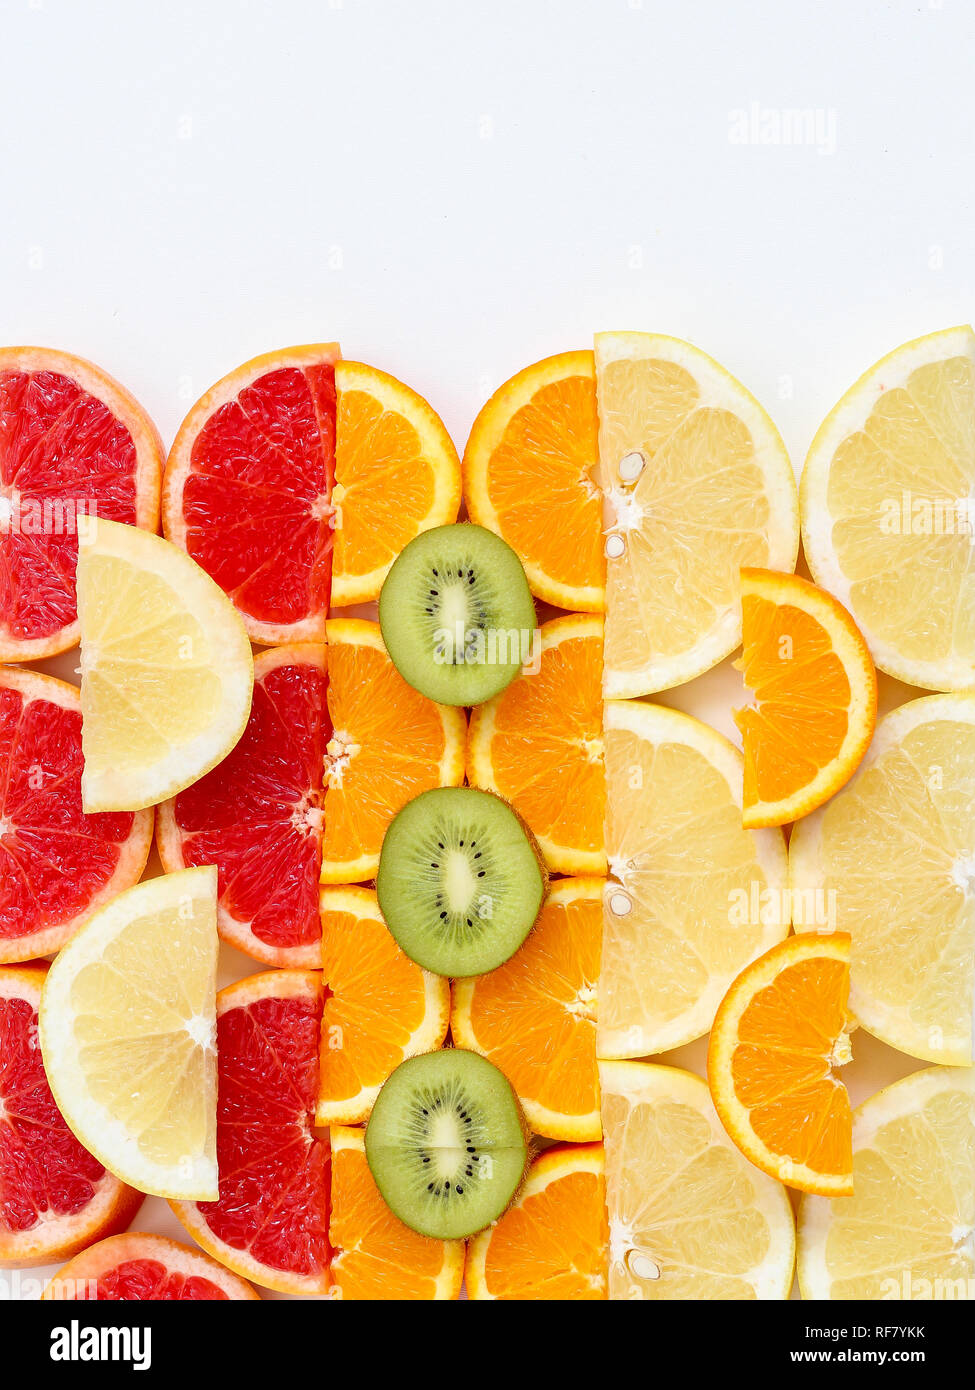 Creative pattern of sliced fruits - kiwi, orange and grapefruits, flat lay style with a copy space on top Stock Photo